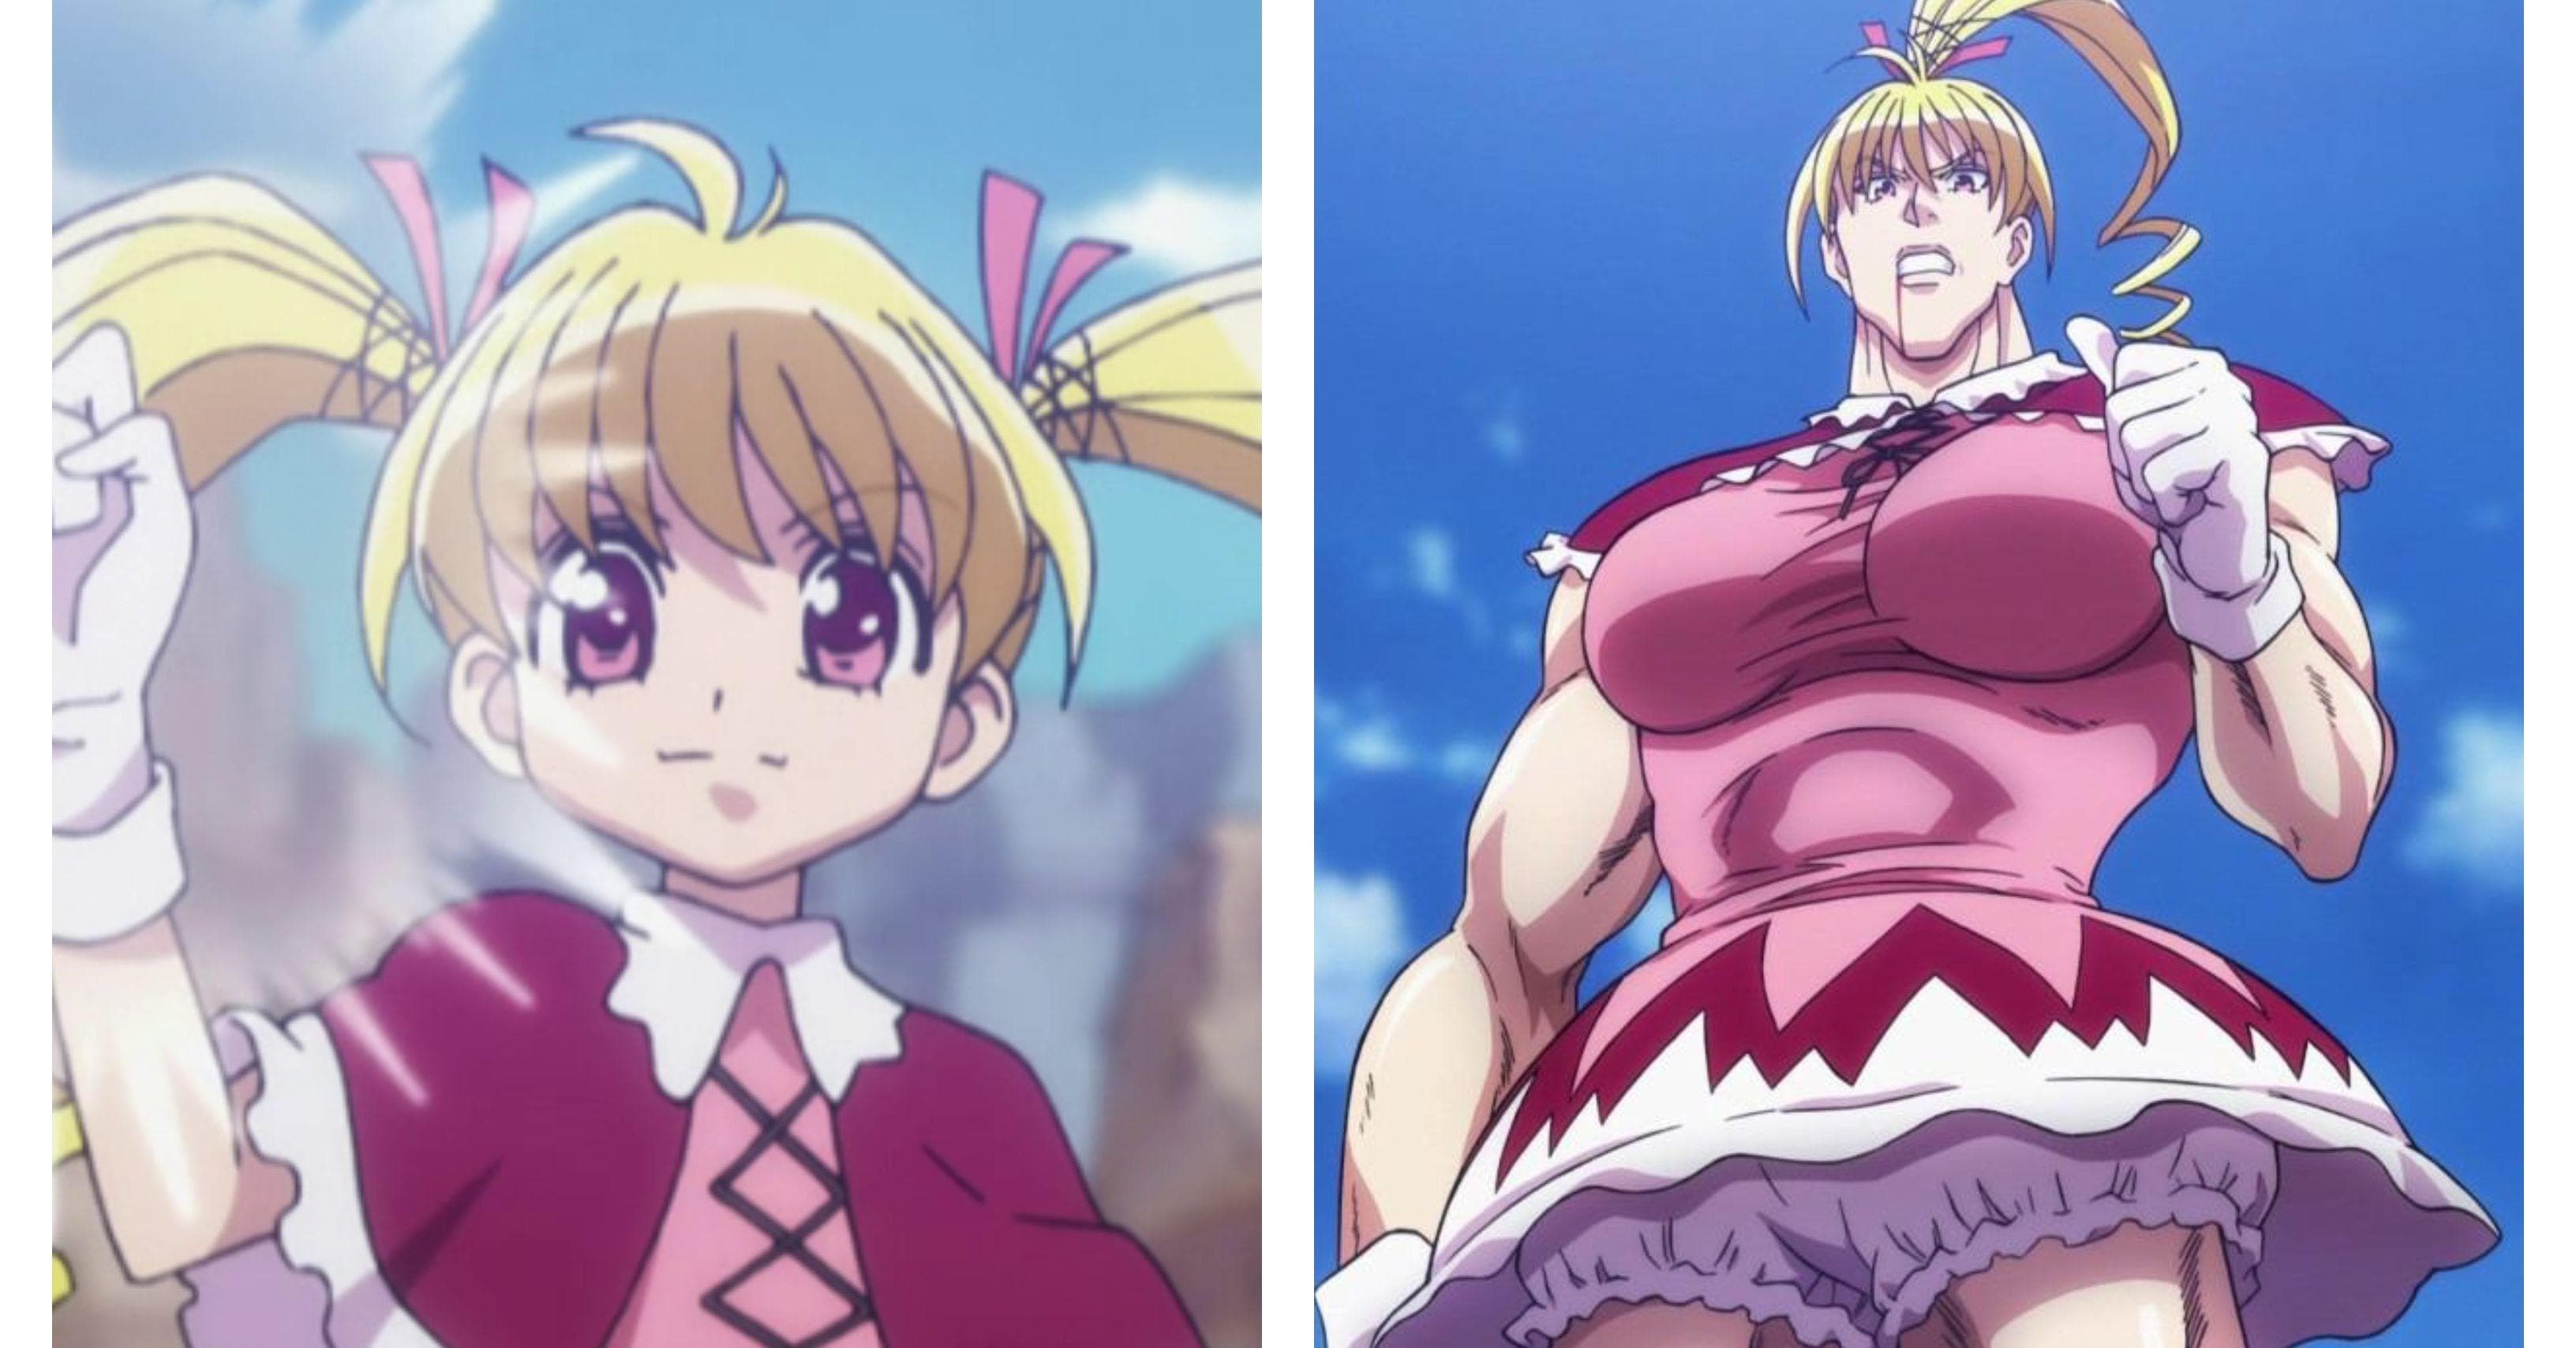 10 Most Muscular Anime Heroes Of All Time, Ranked